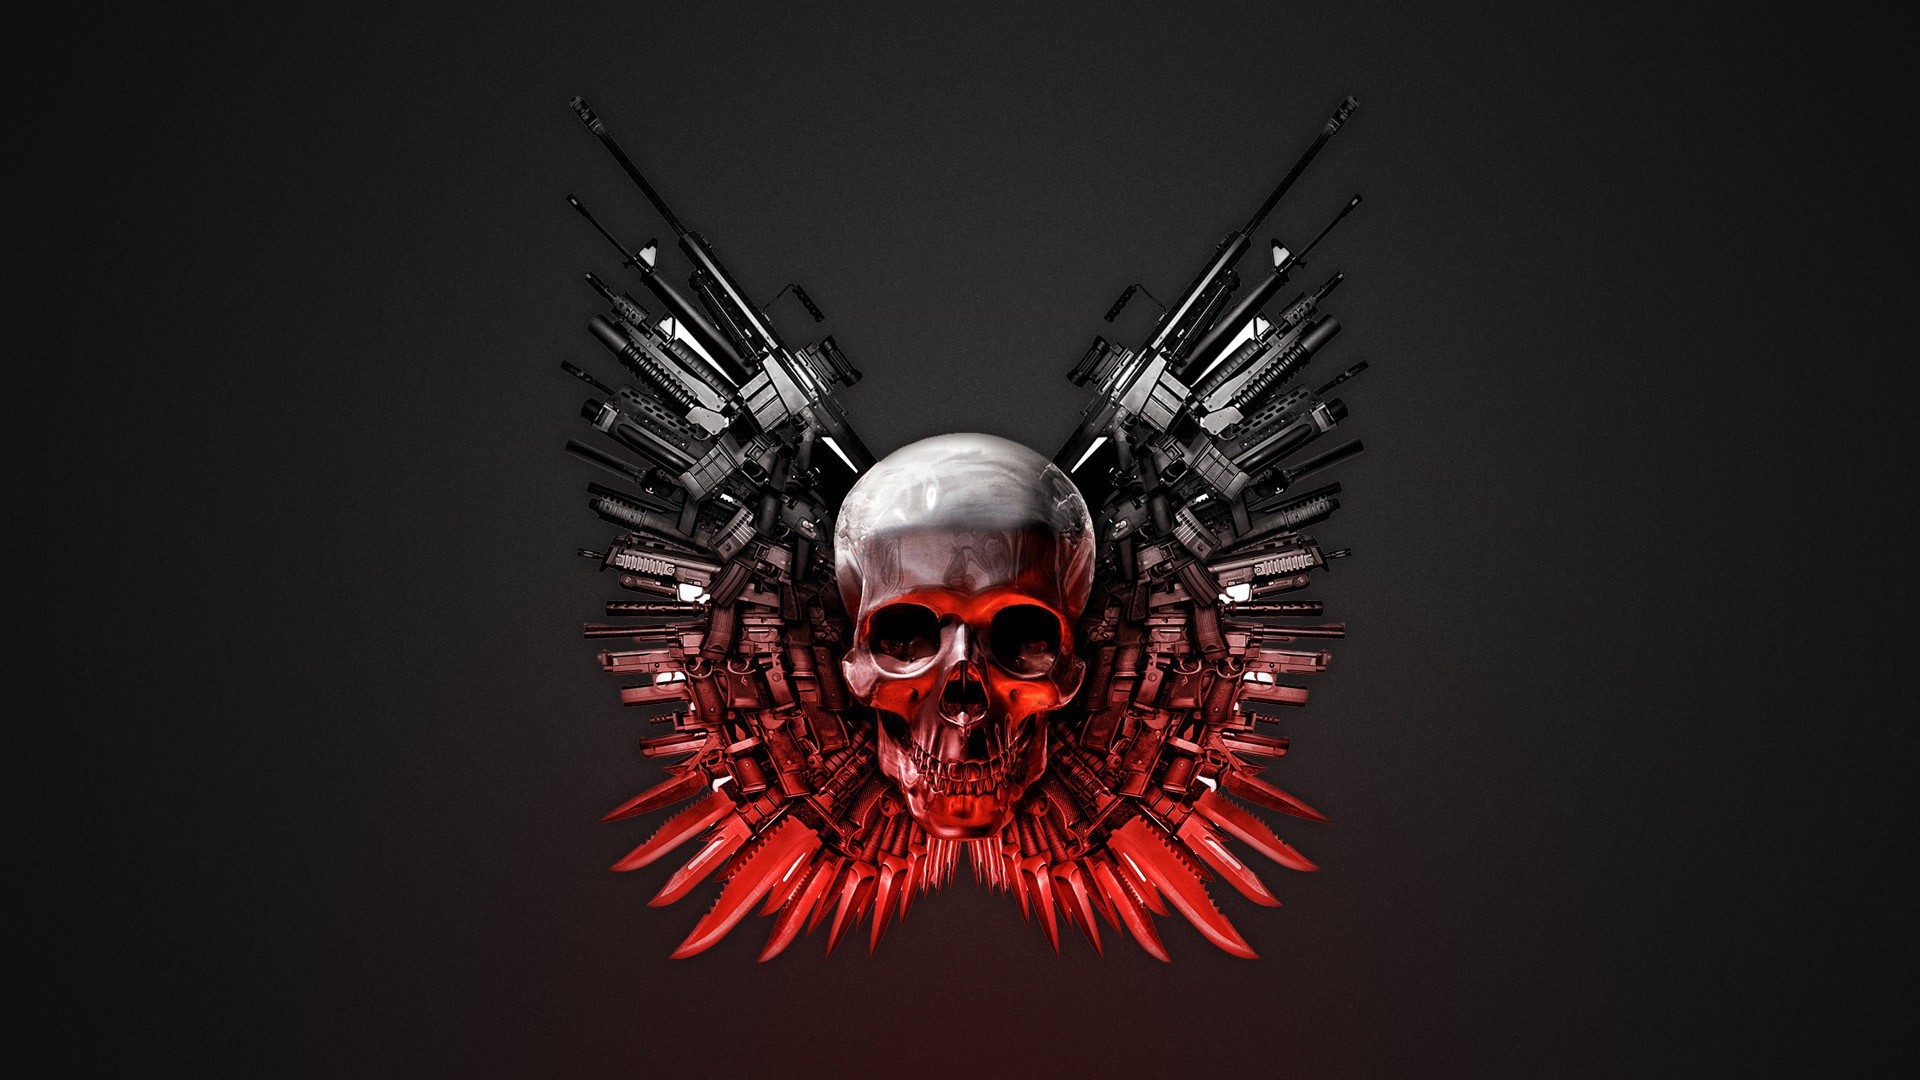 Abstract Skulls Wallpaper Weapons The